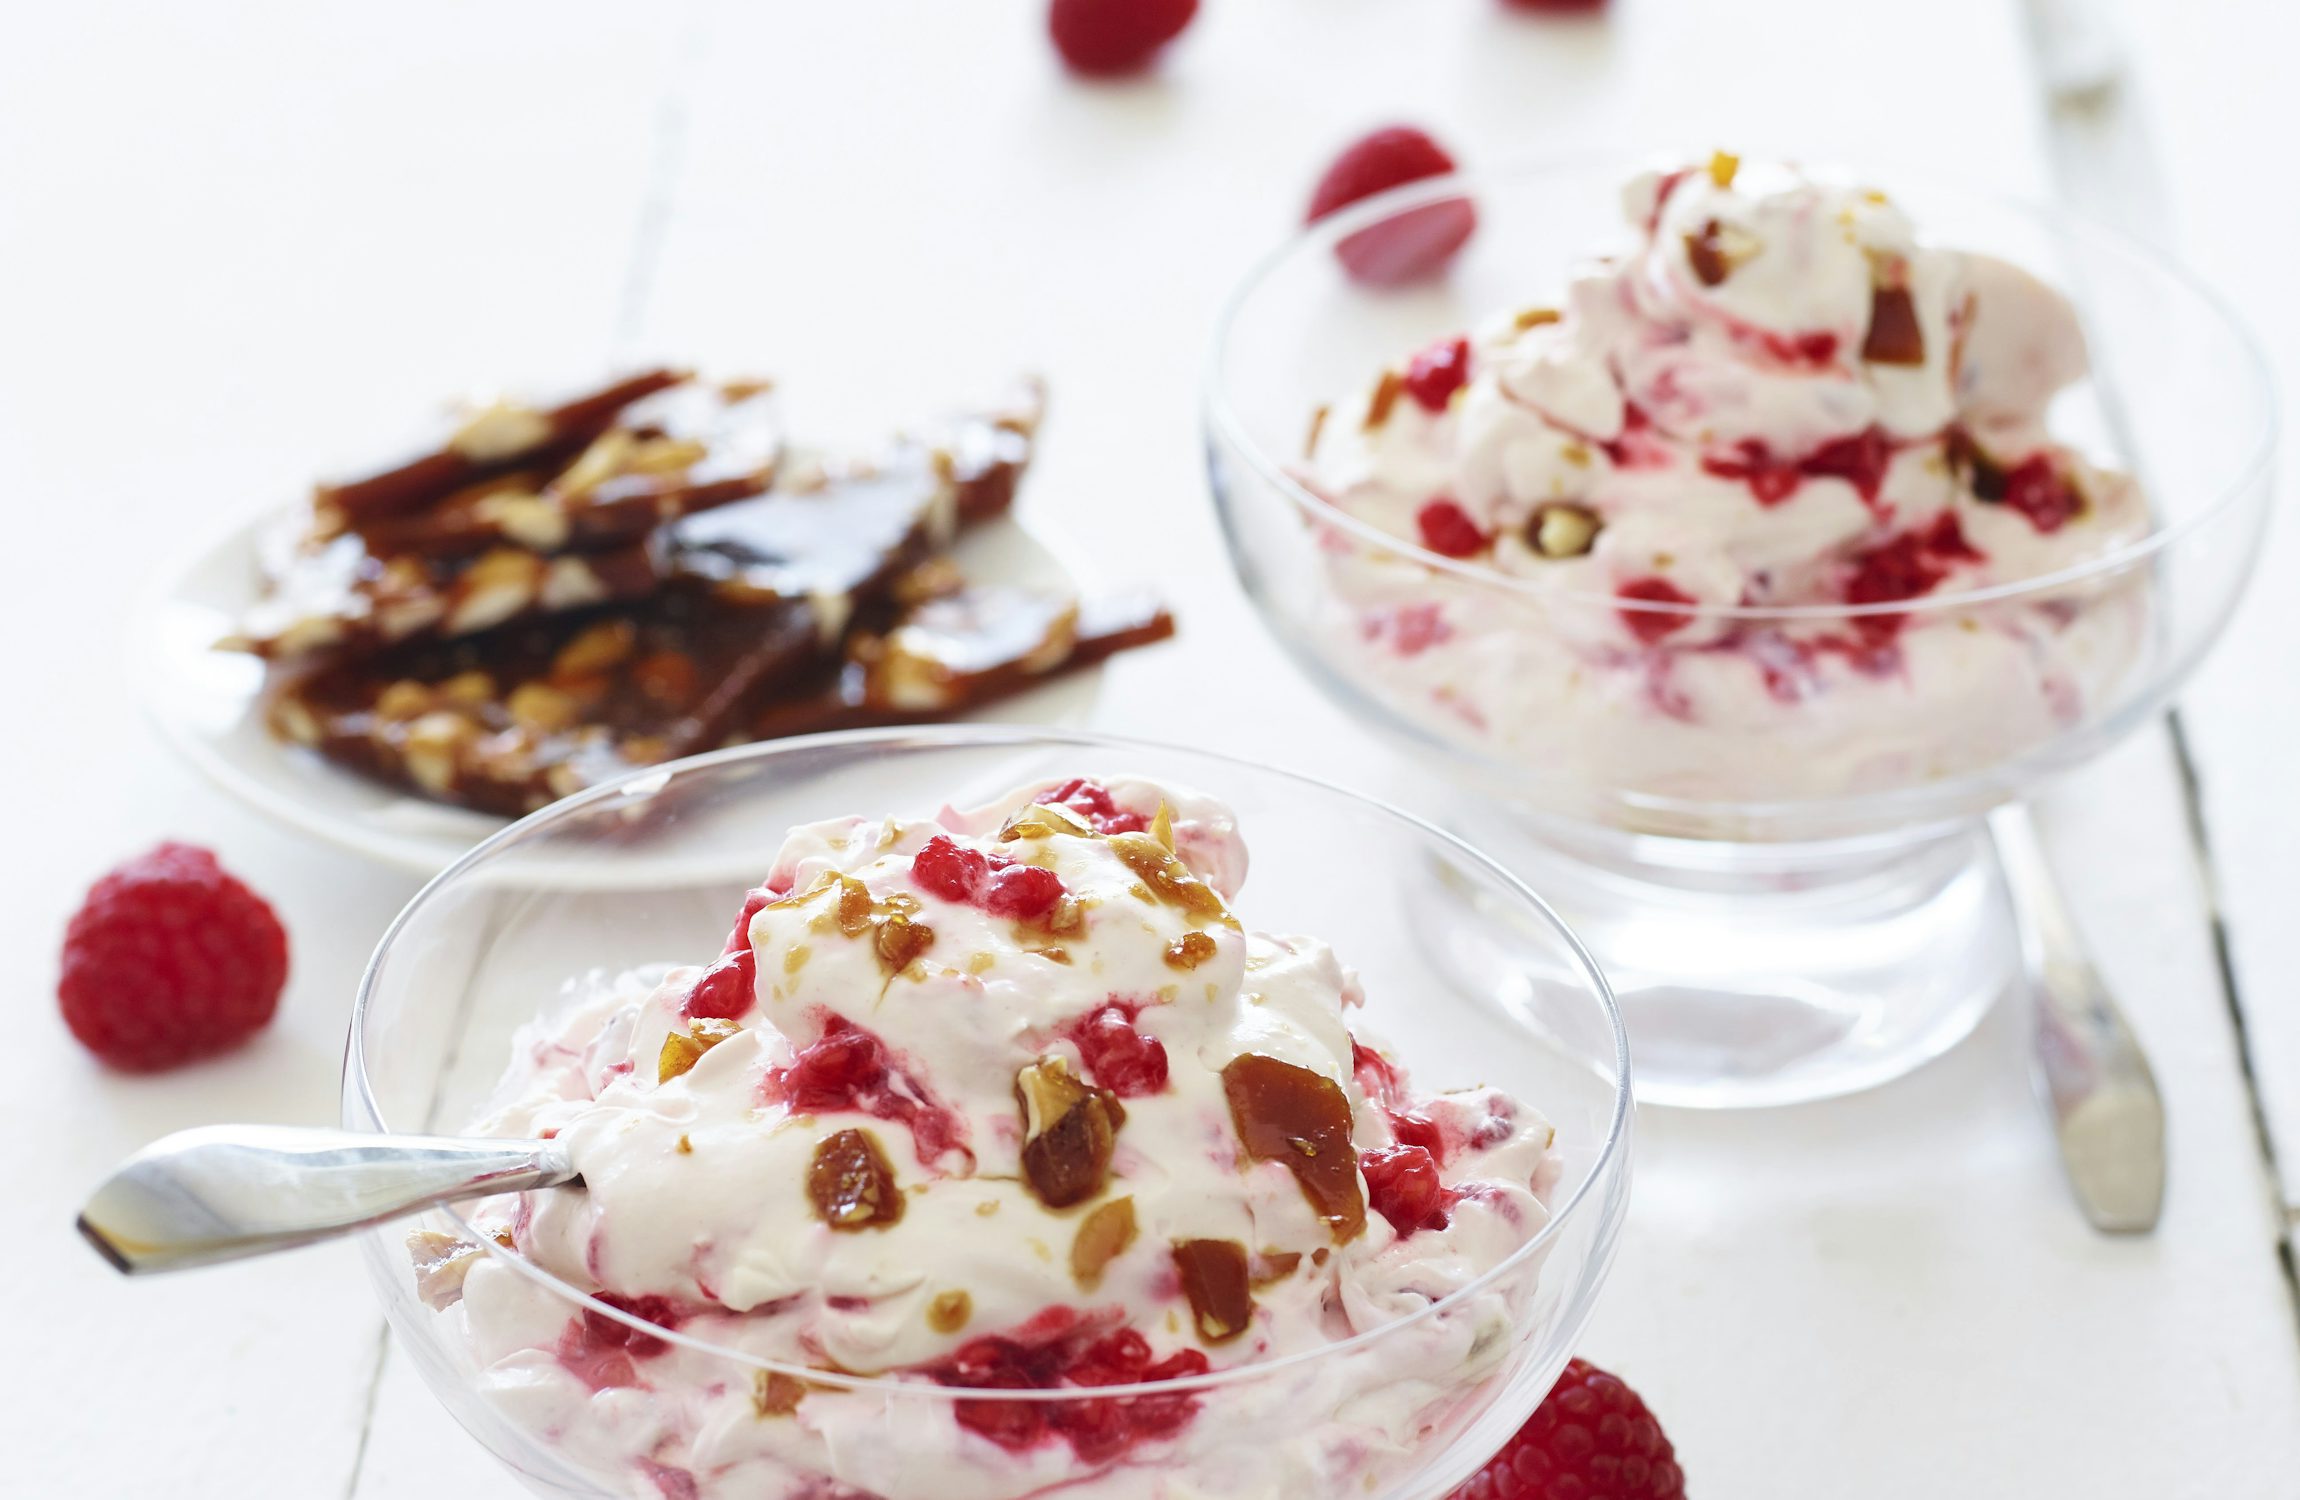 Raspberry Fool with Almond Toffee Shards and Whole Raspberries